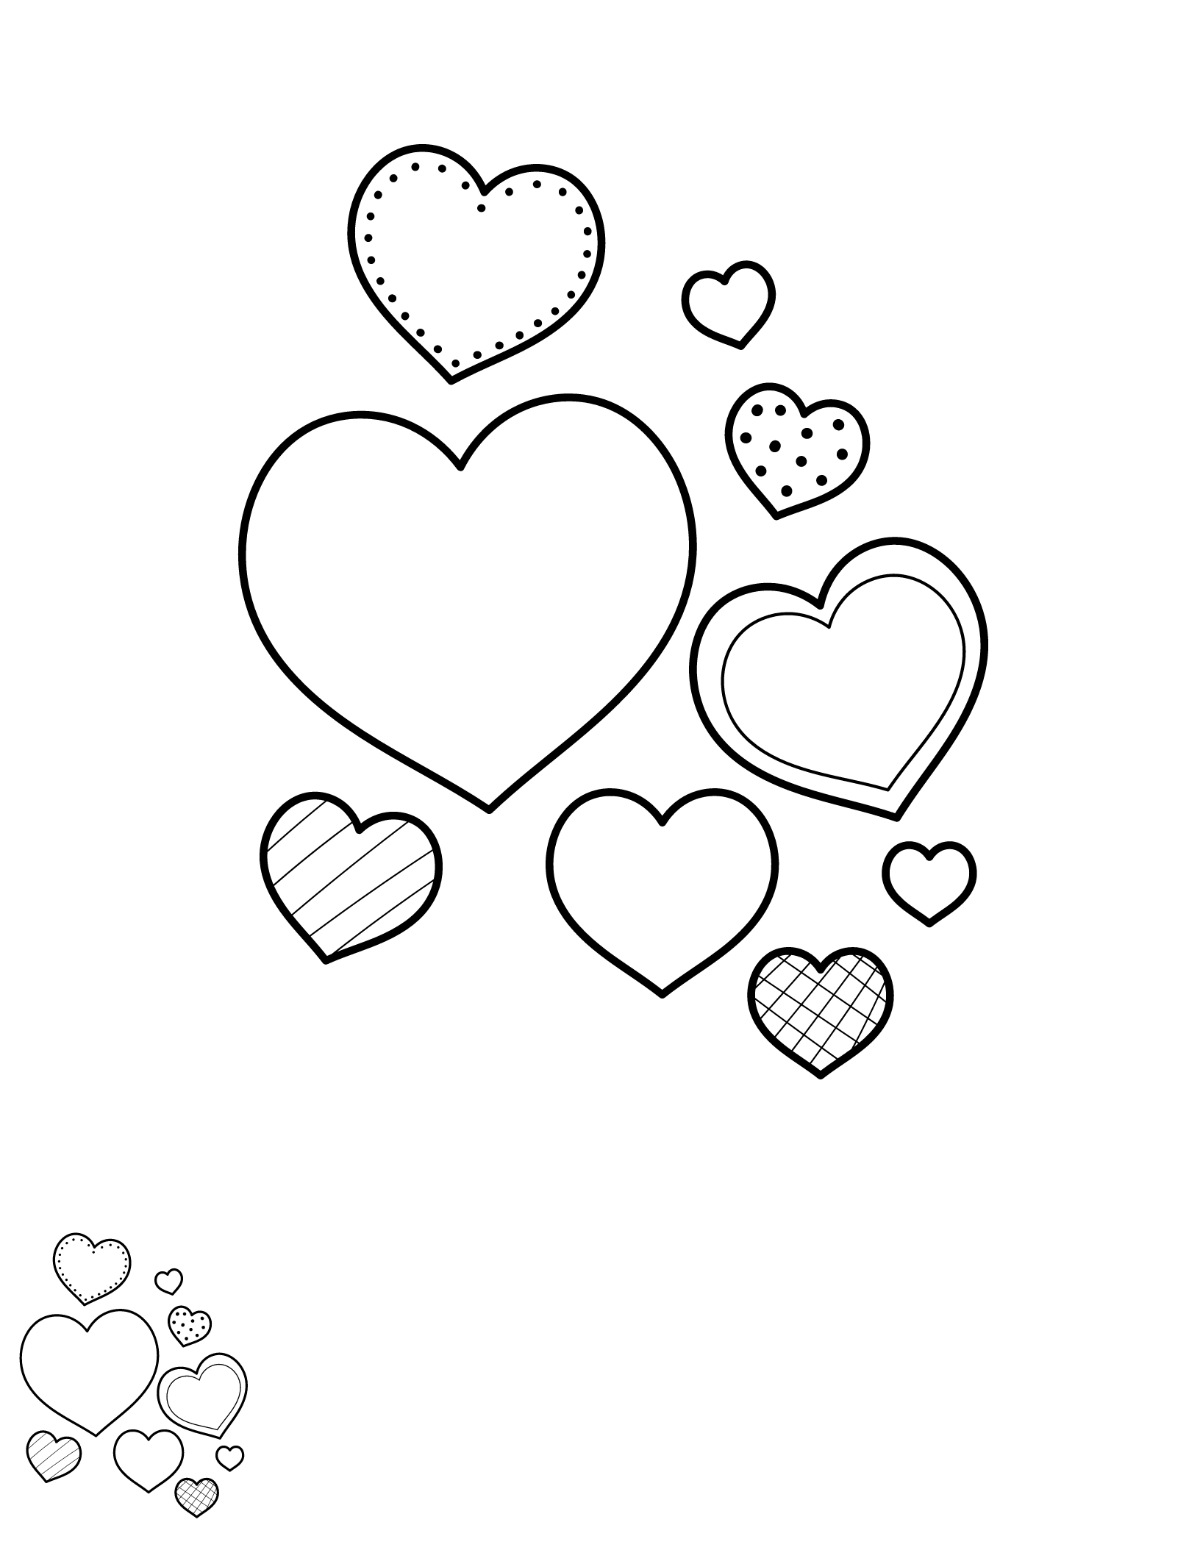 Heart Coloring Page for Kids Template